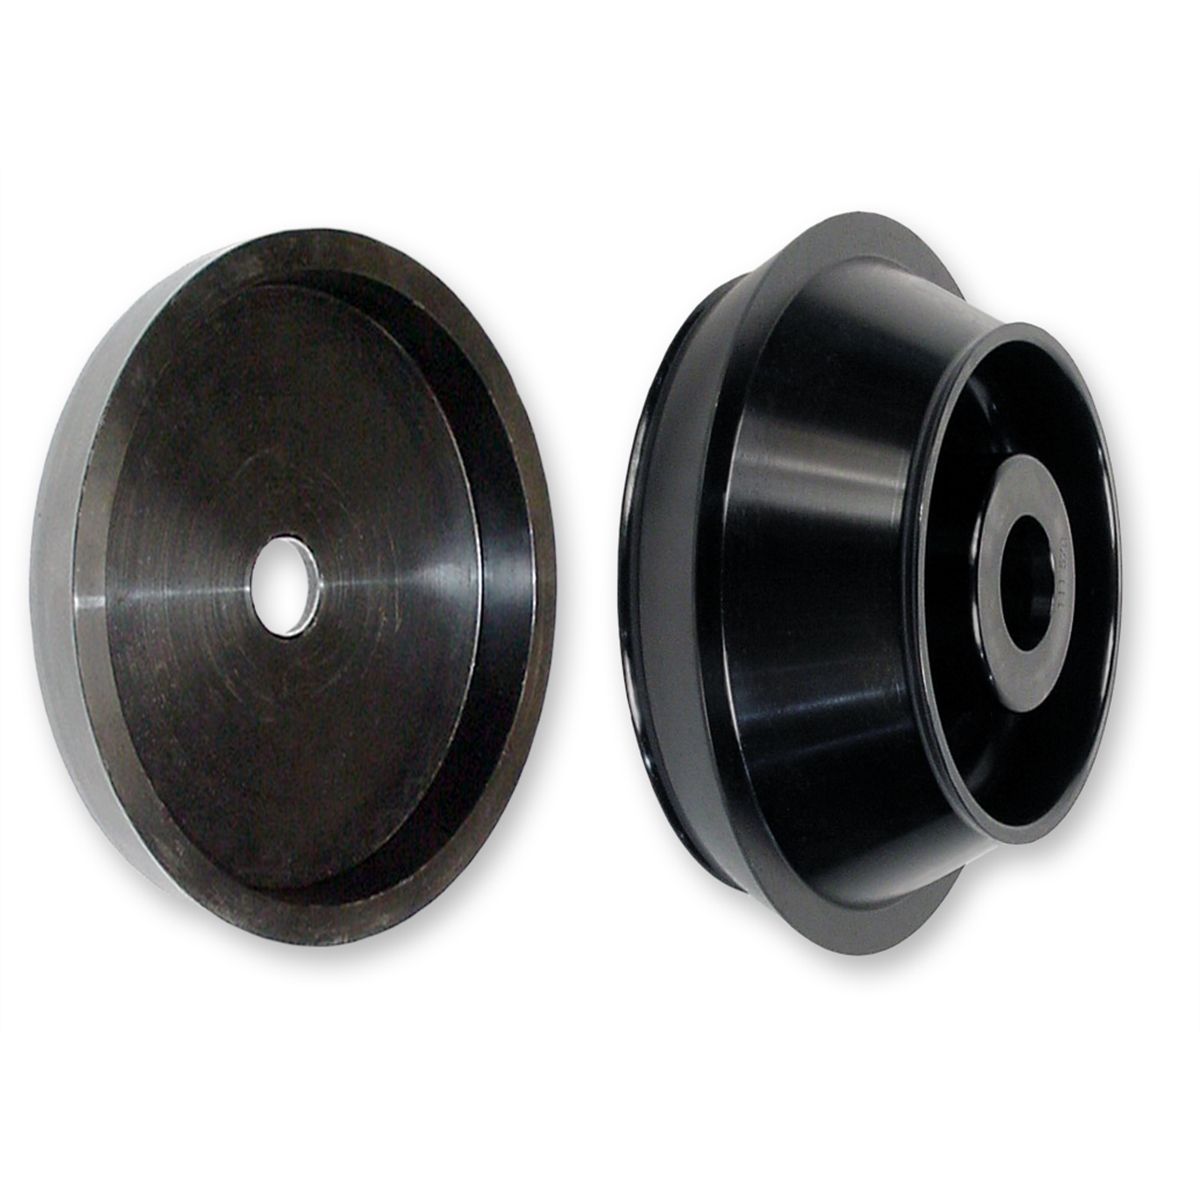 Light Truck Front Cone Kit 1.125 Inch 28mm I.D.